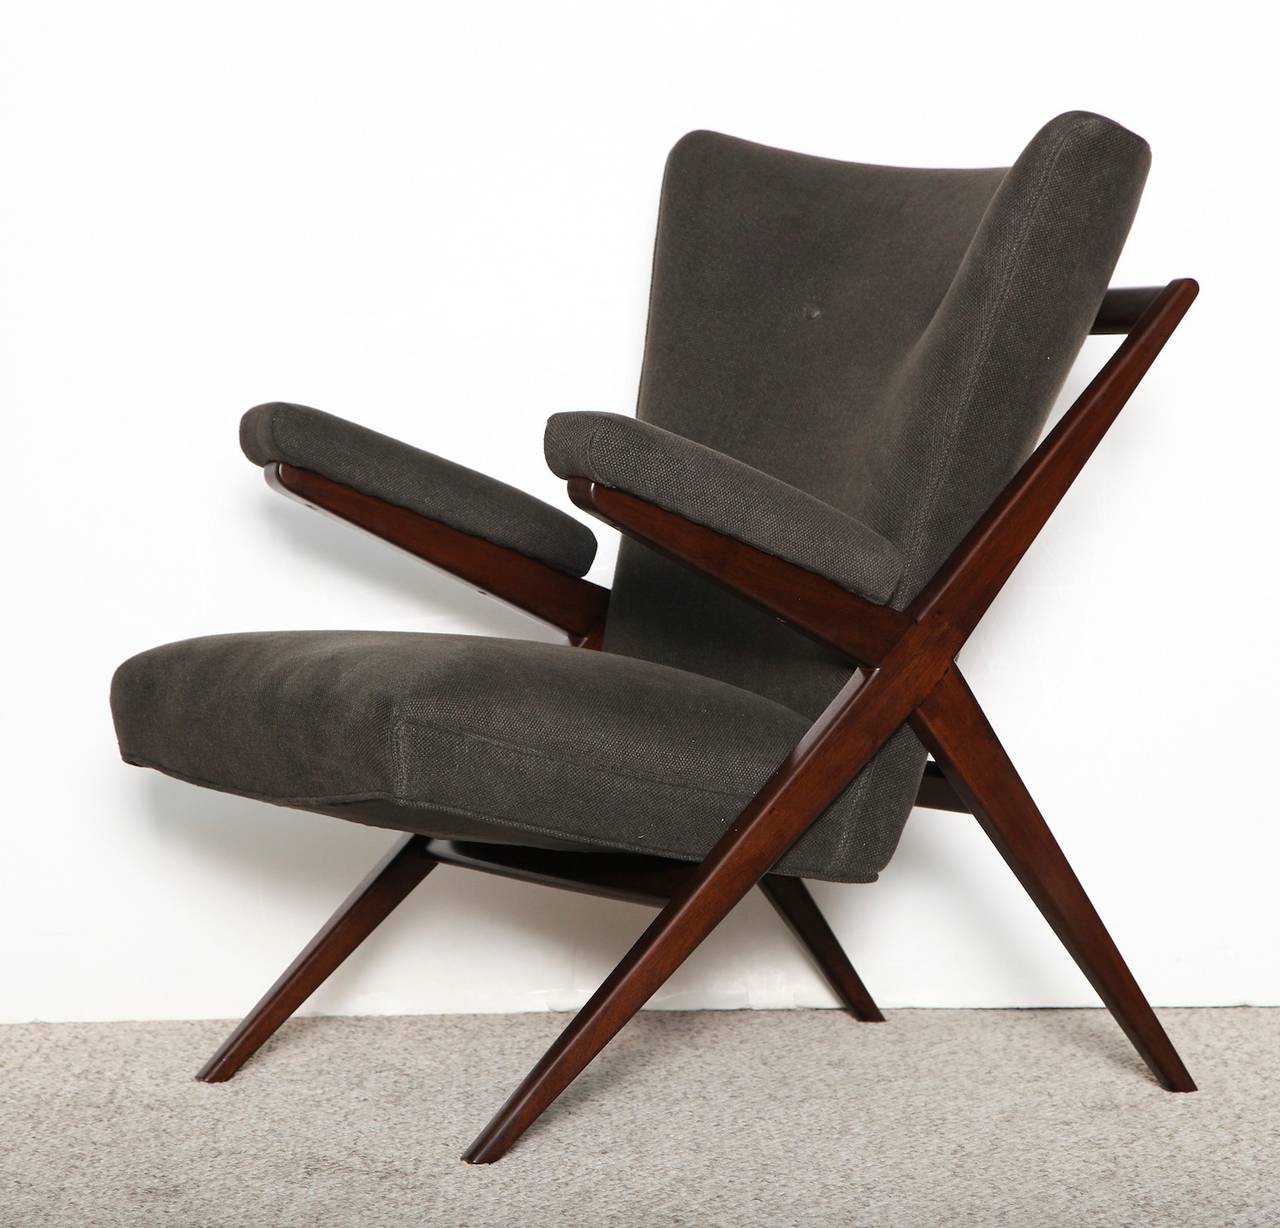 Dark stained walnut frames with upholstered seats and armrests. Great architectural X-forms. Designed in 1949, this model was in production throughout the 1950s. Produced and sold by Cassina in Italy and distributed in the USA by M. Singer & Sons.